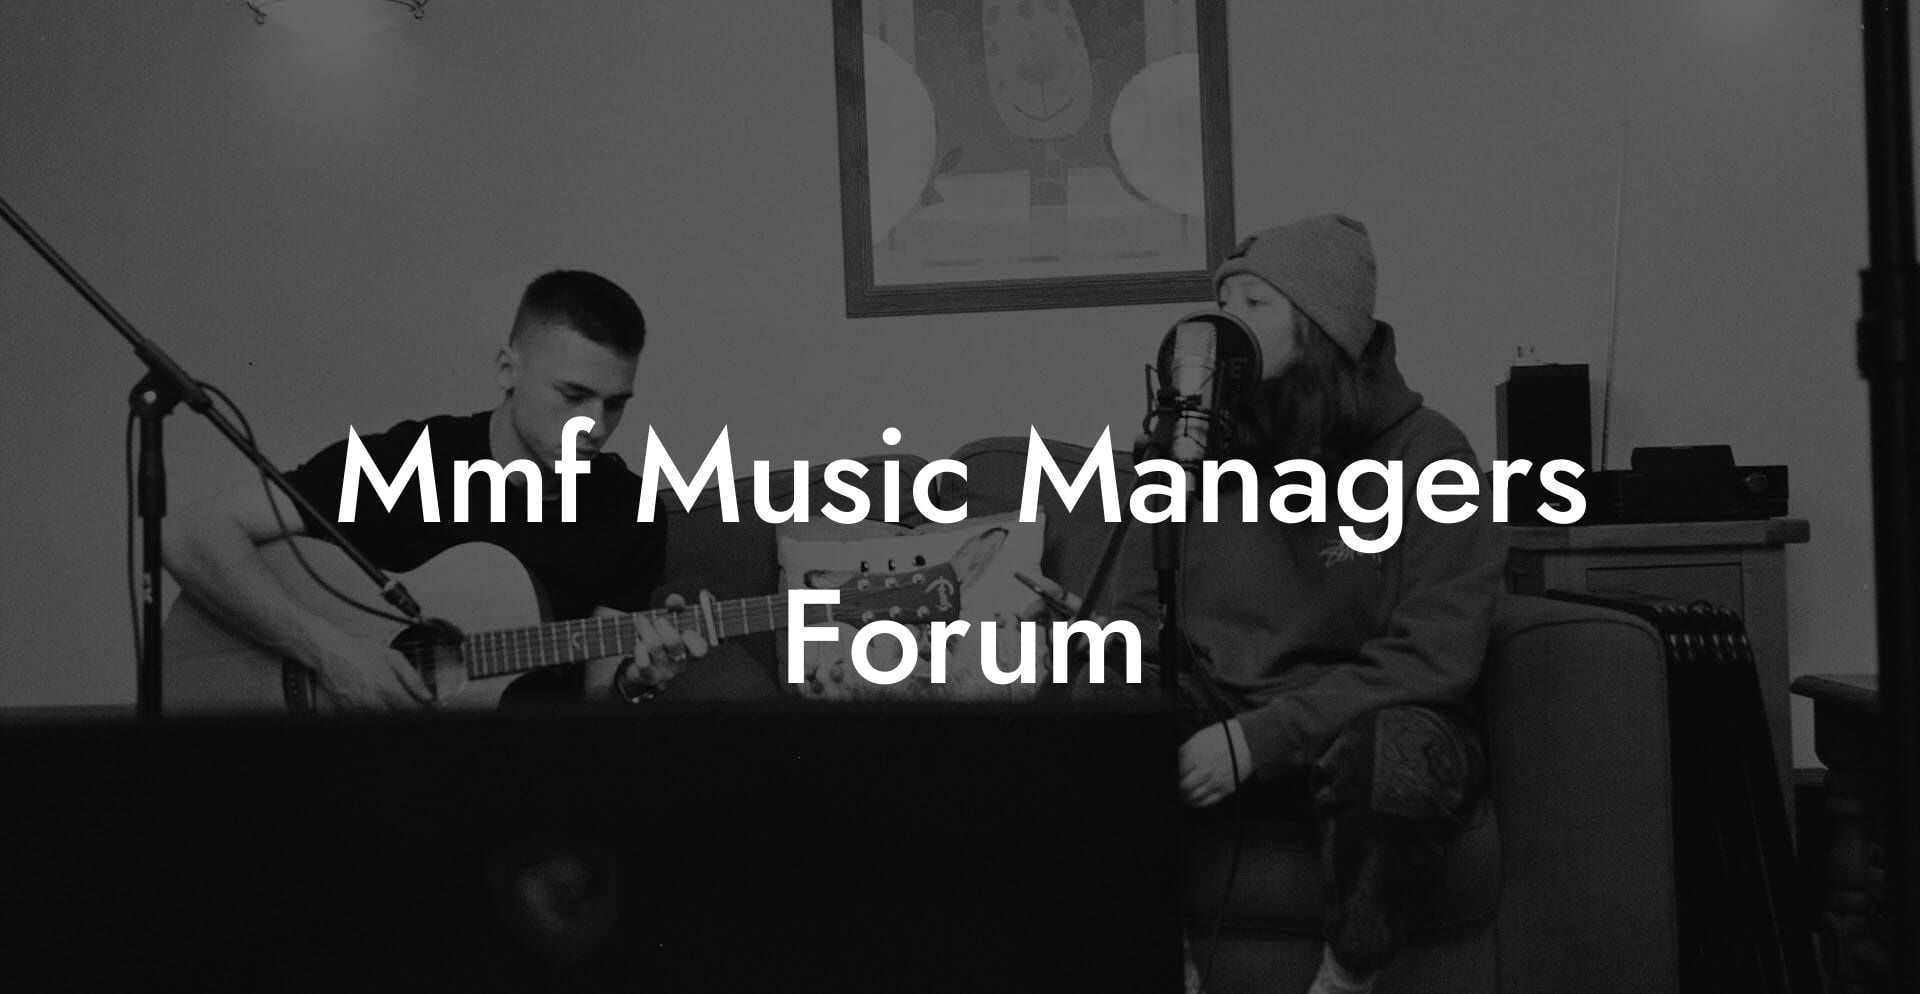 Mmf Music Managers Forum